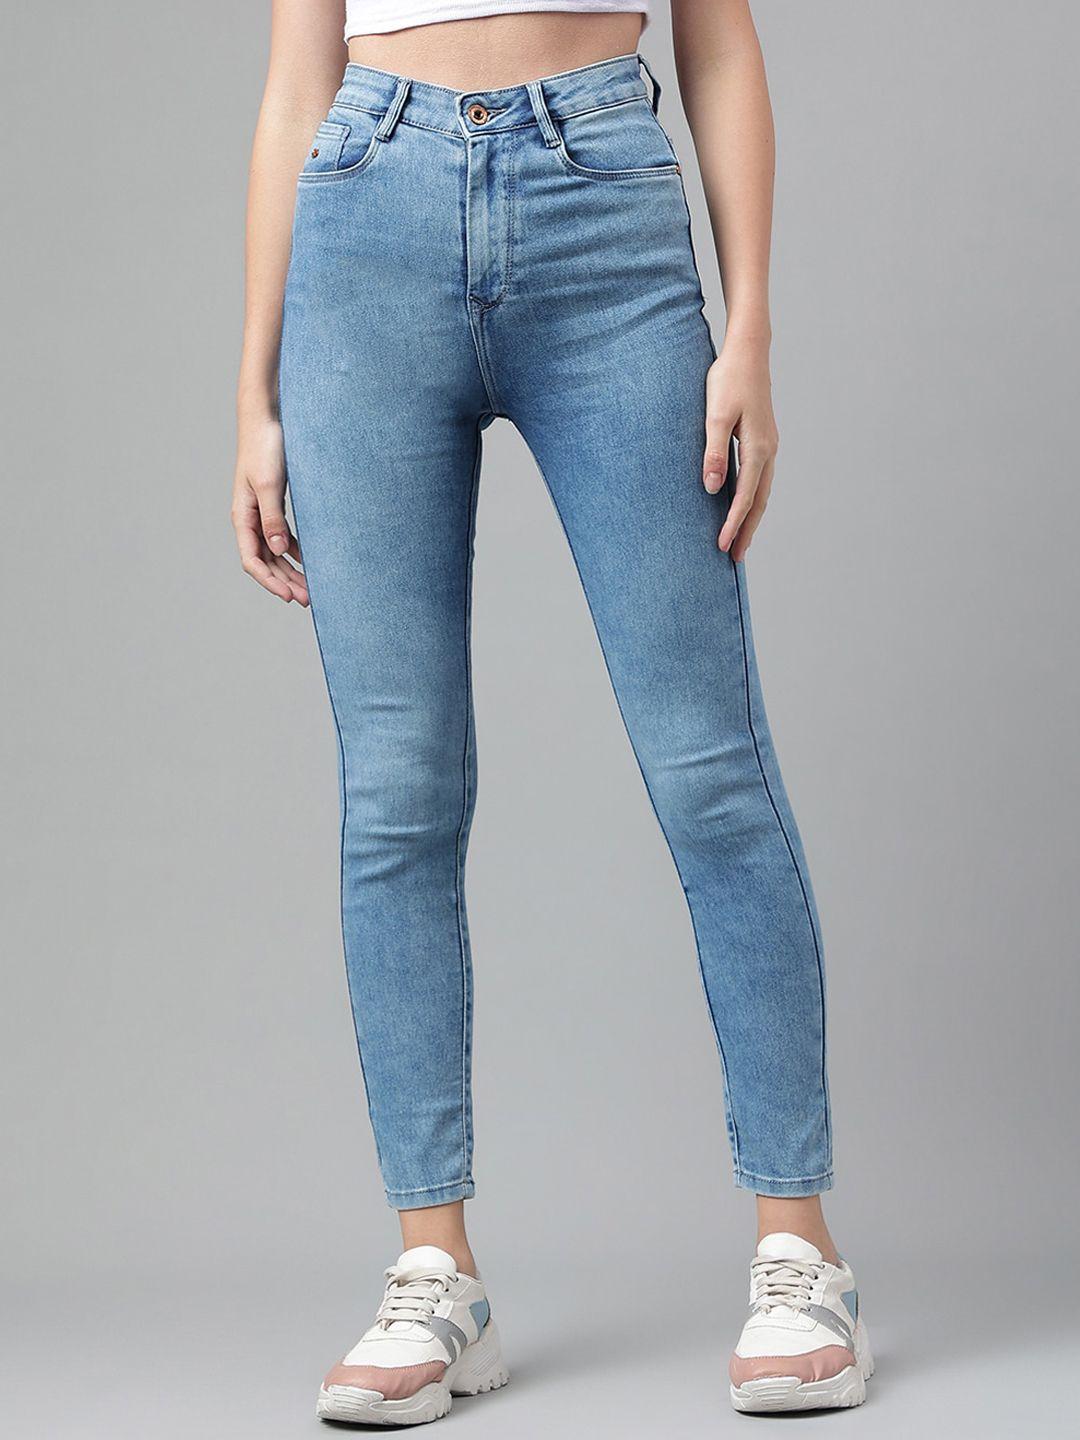 code 61 women high-rise skinny fit stretchable cropped jeans